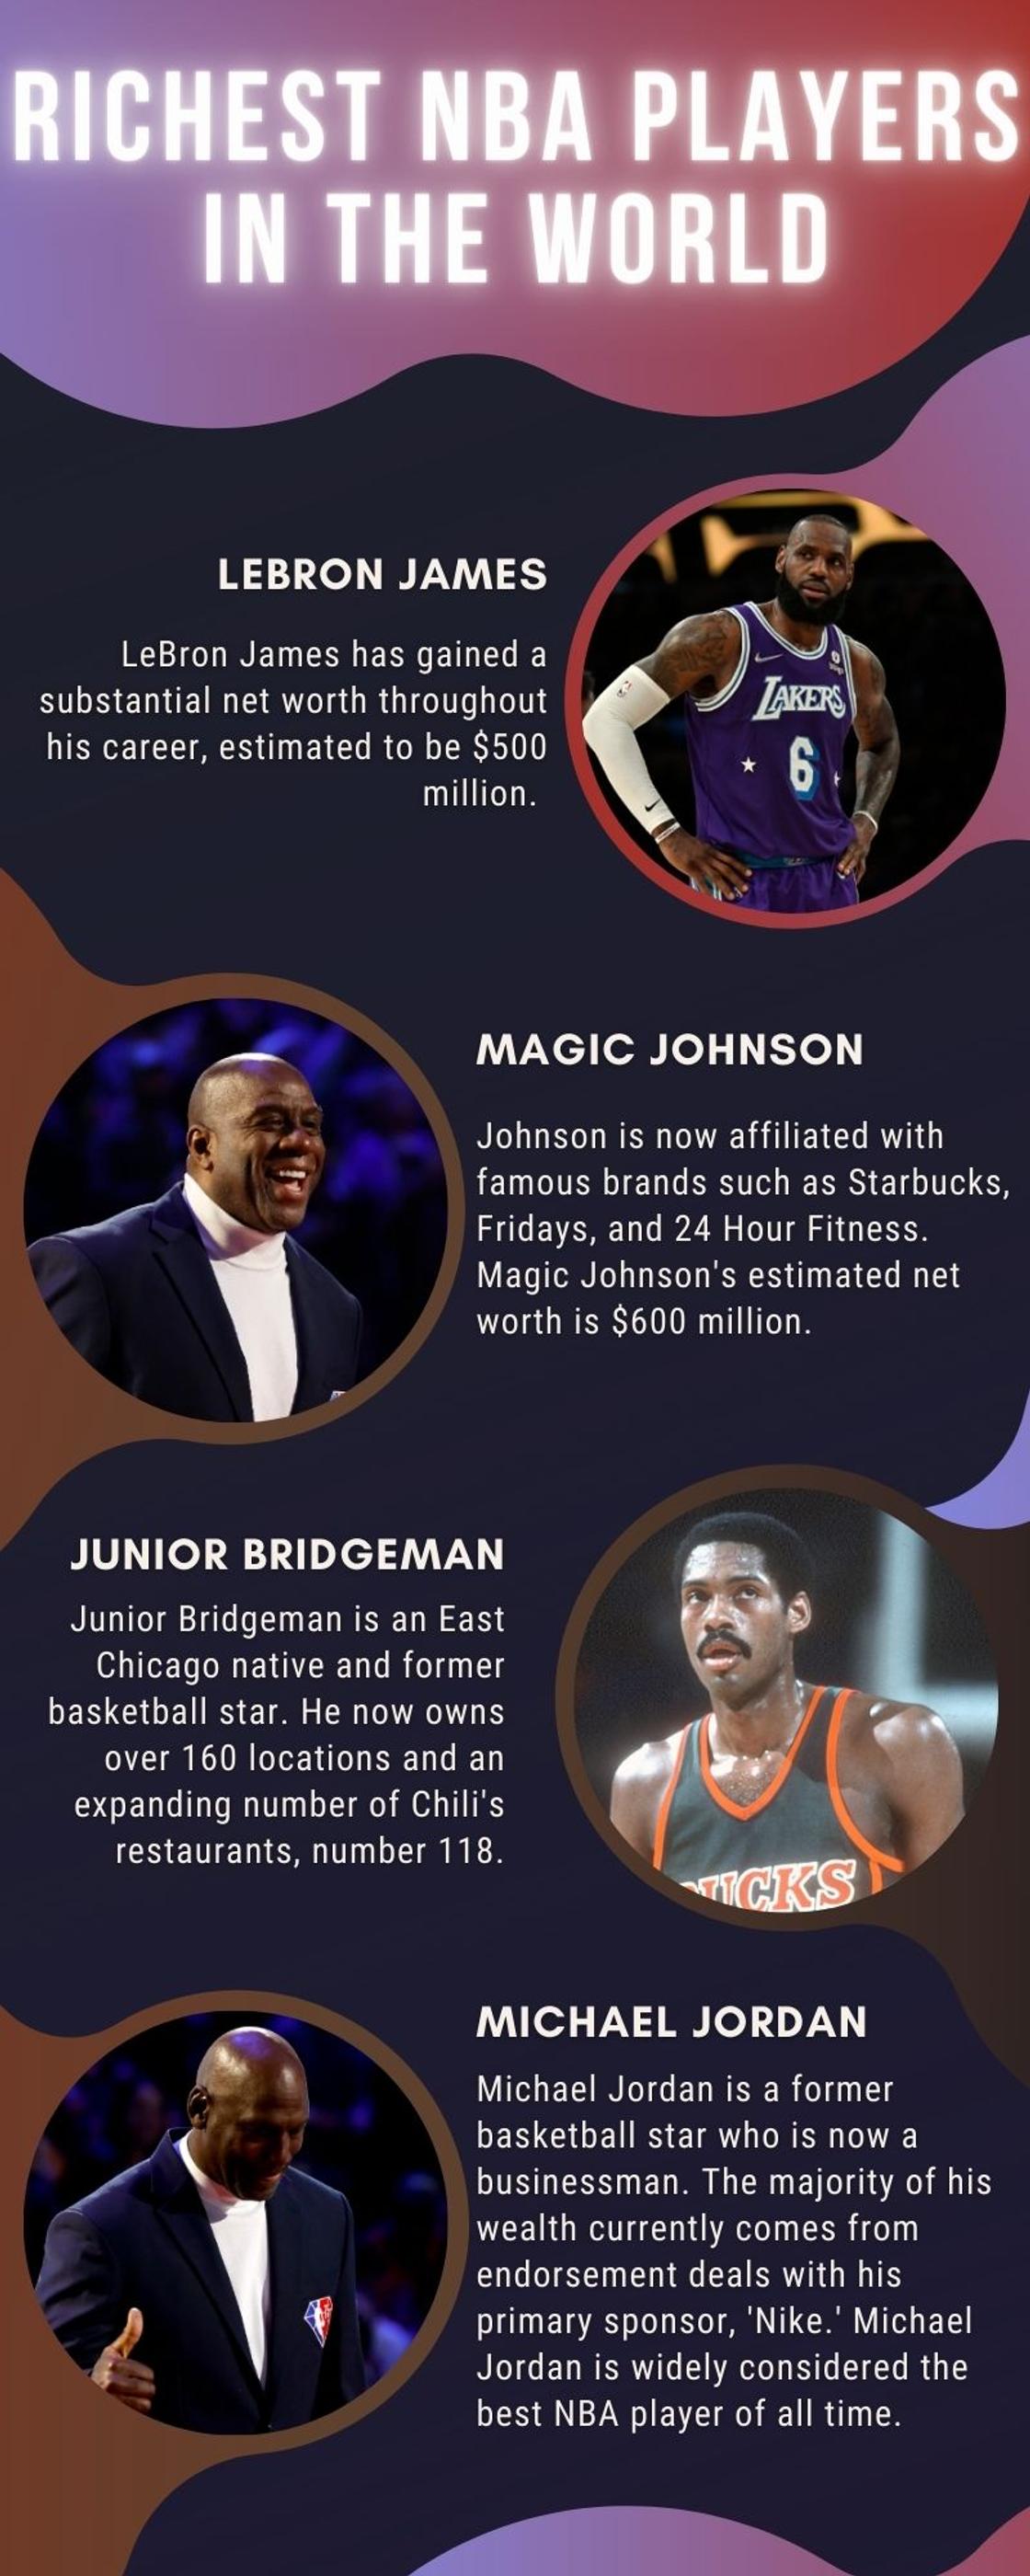 Richest NBA players in the world